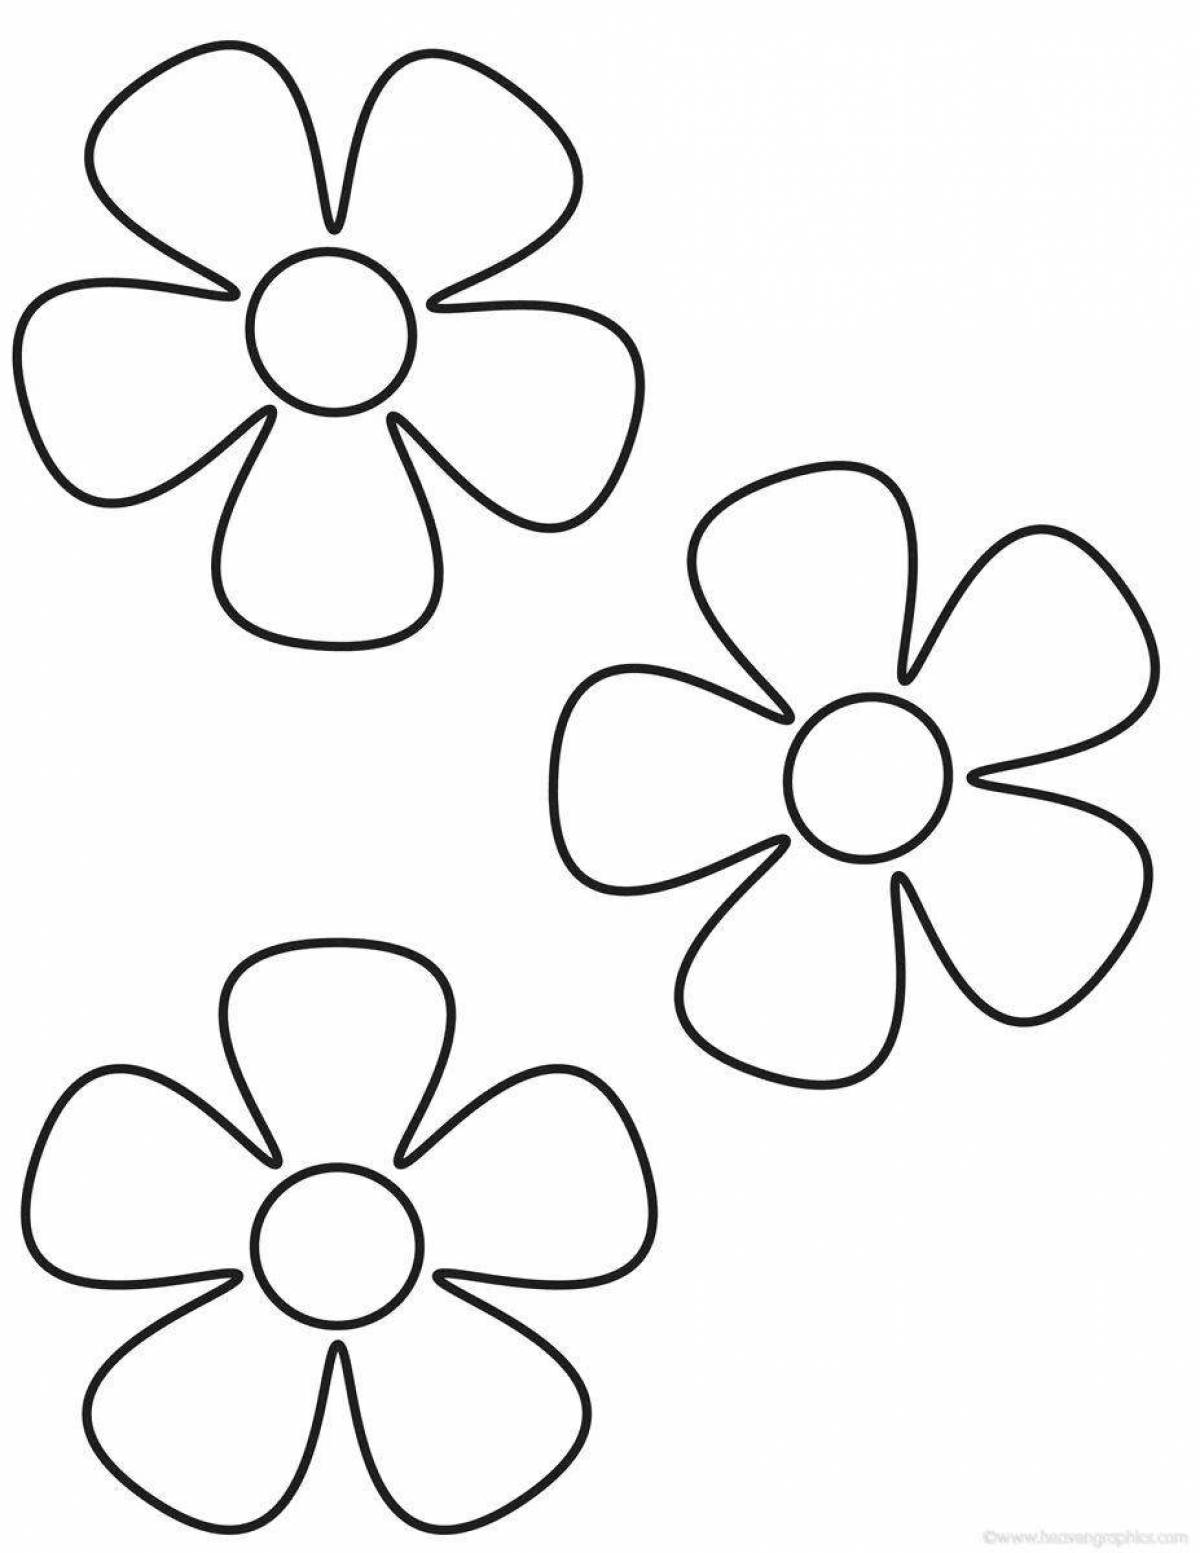 Blissful coloring small flowers